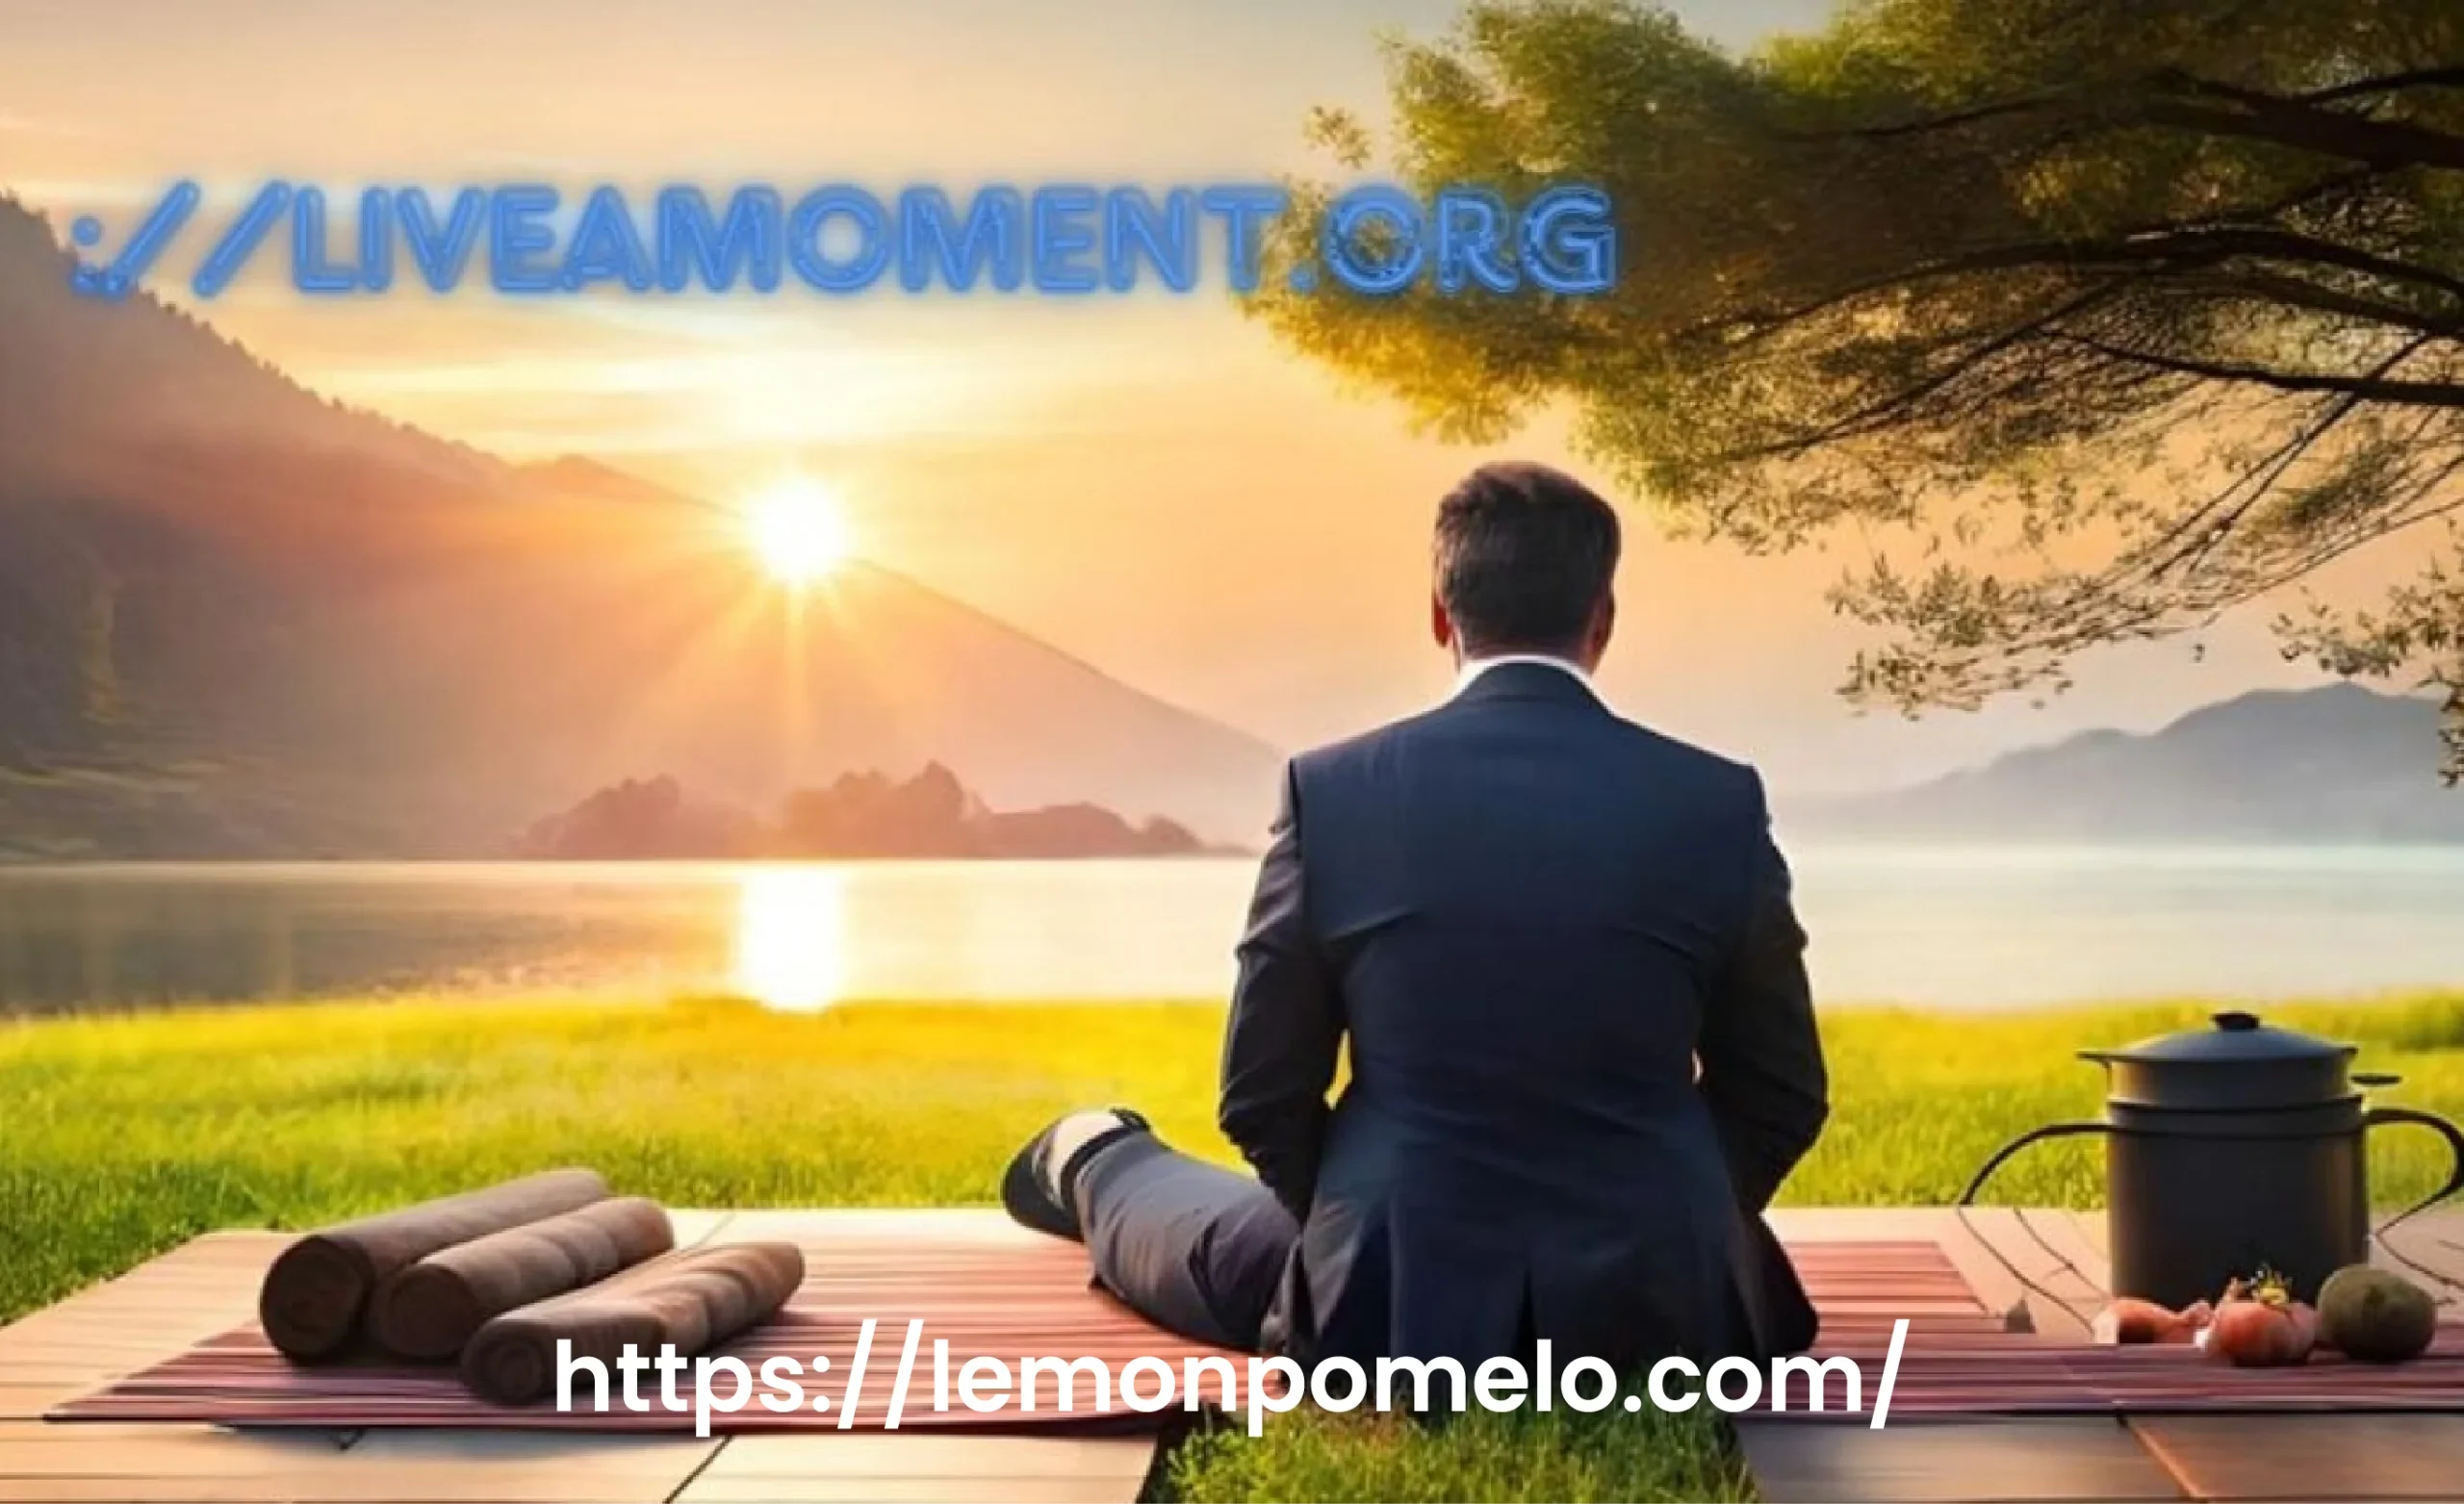 LiveaMoment.org